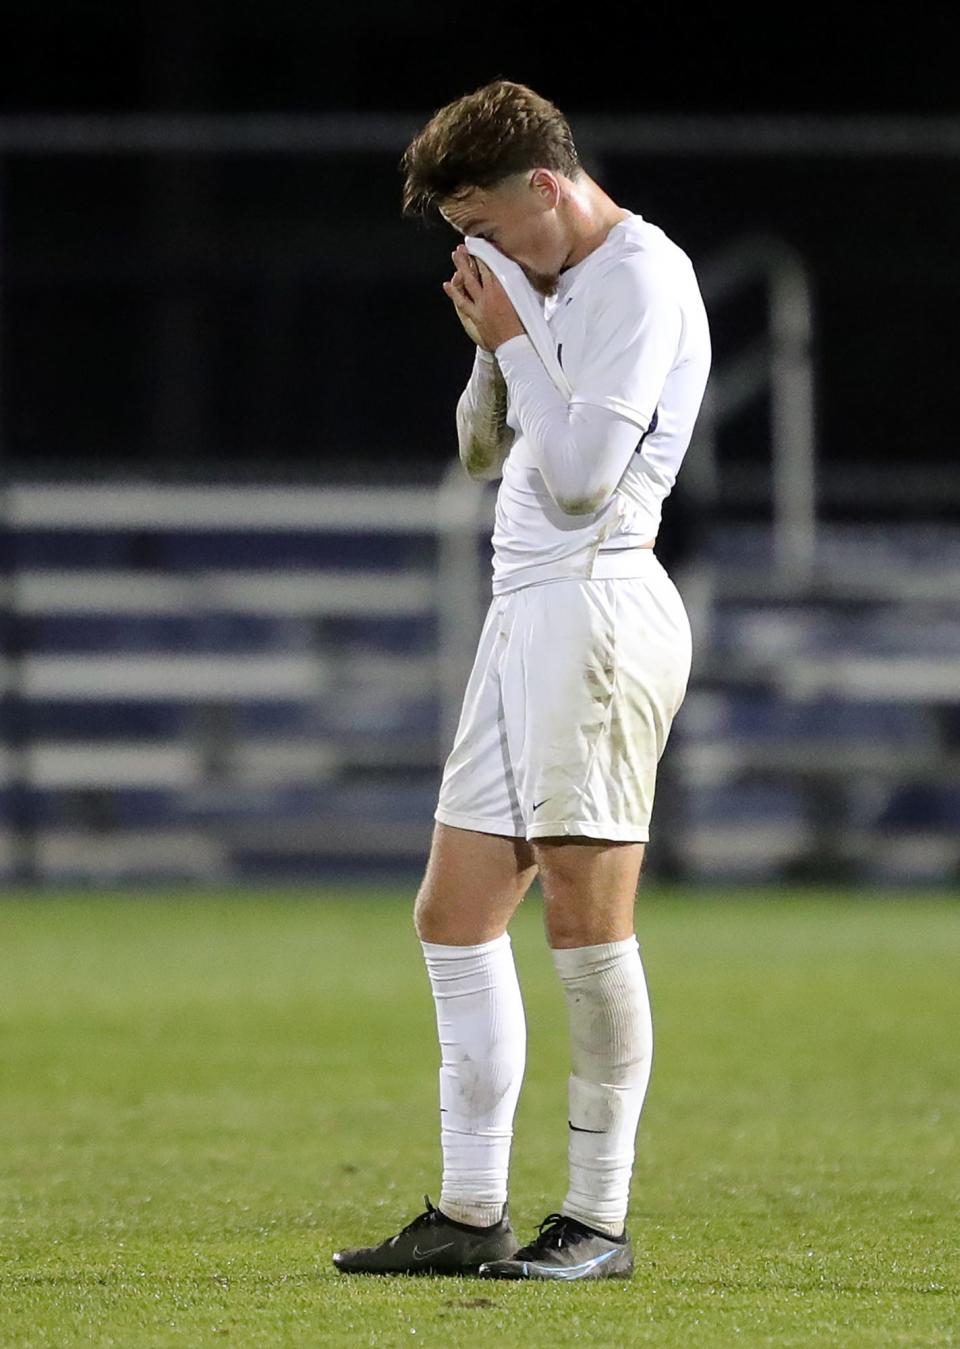 Akron midfielder Dyson Clapier (19) reacts after the Zips tied 0-0 in an NCAA college soccer game against Michigan, Monday, Oct. 18, 2021, in Akron, Ohio.